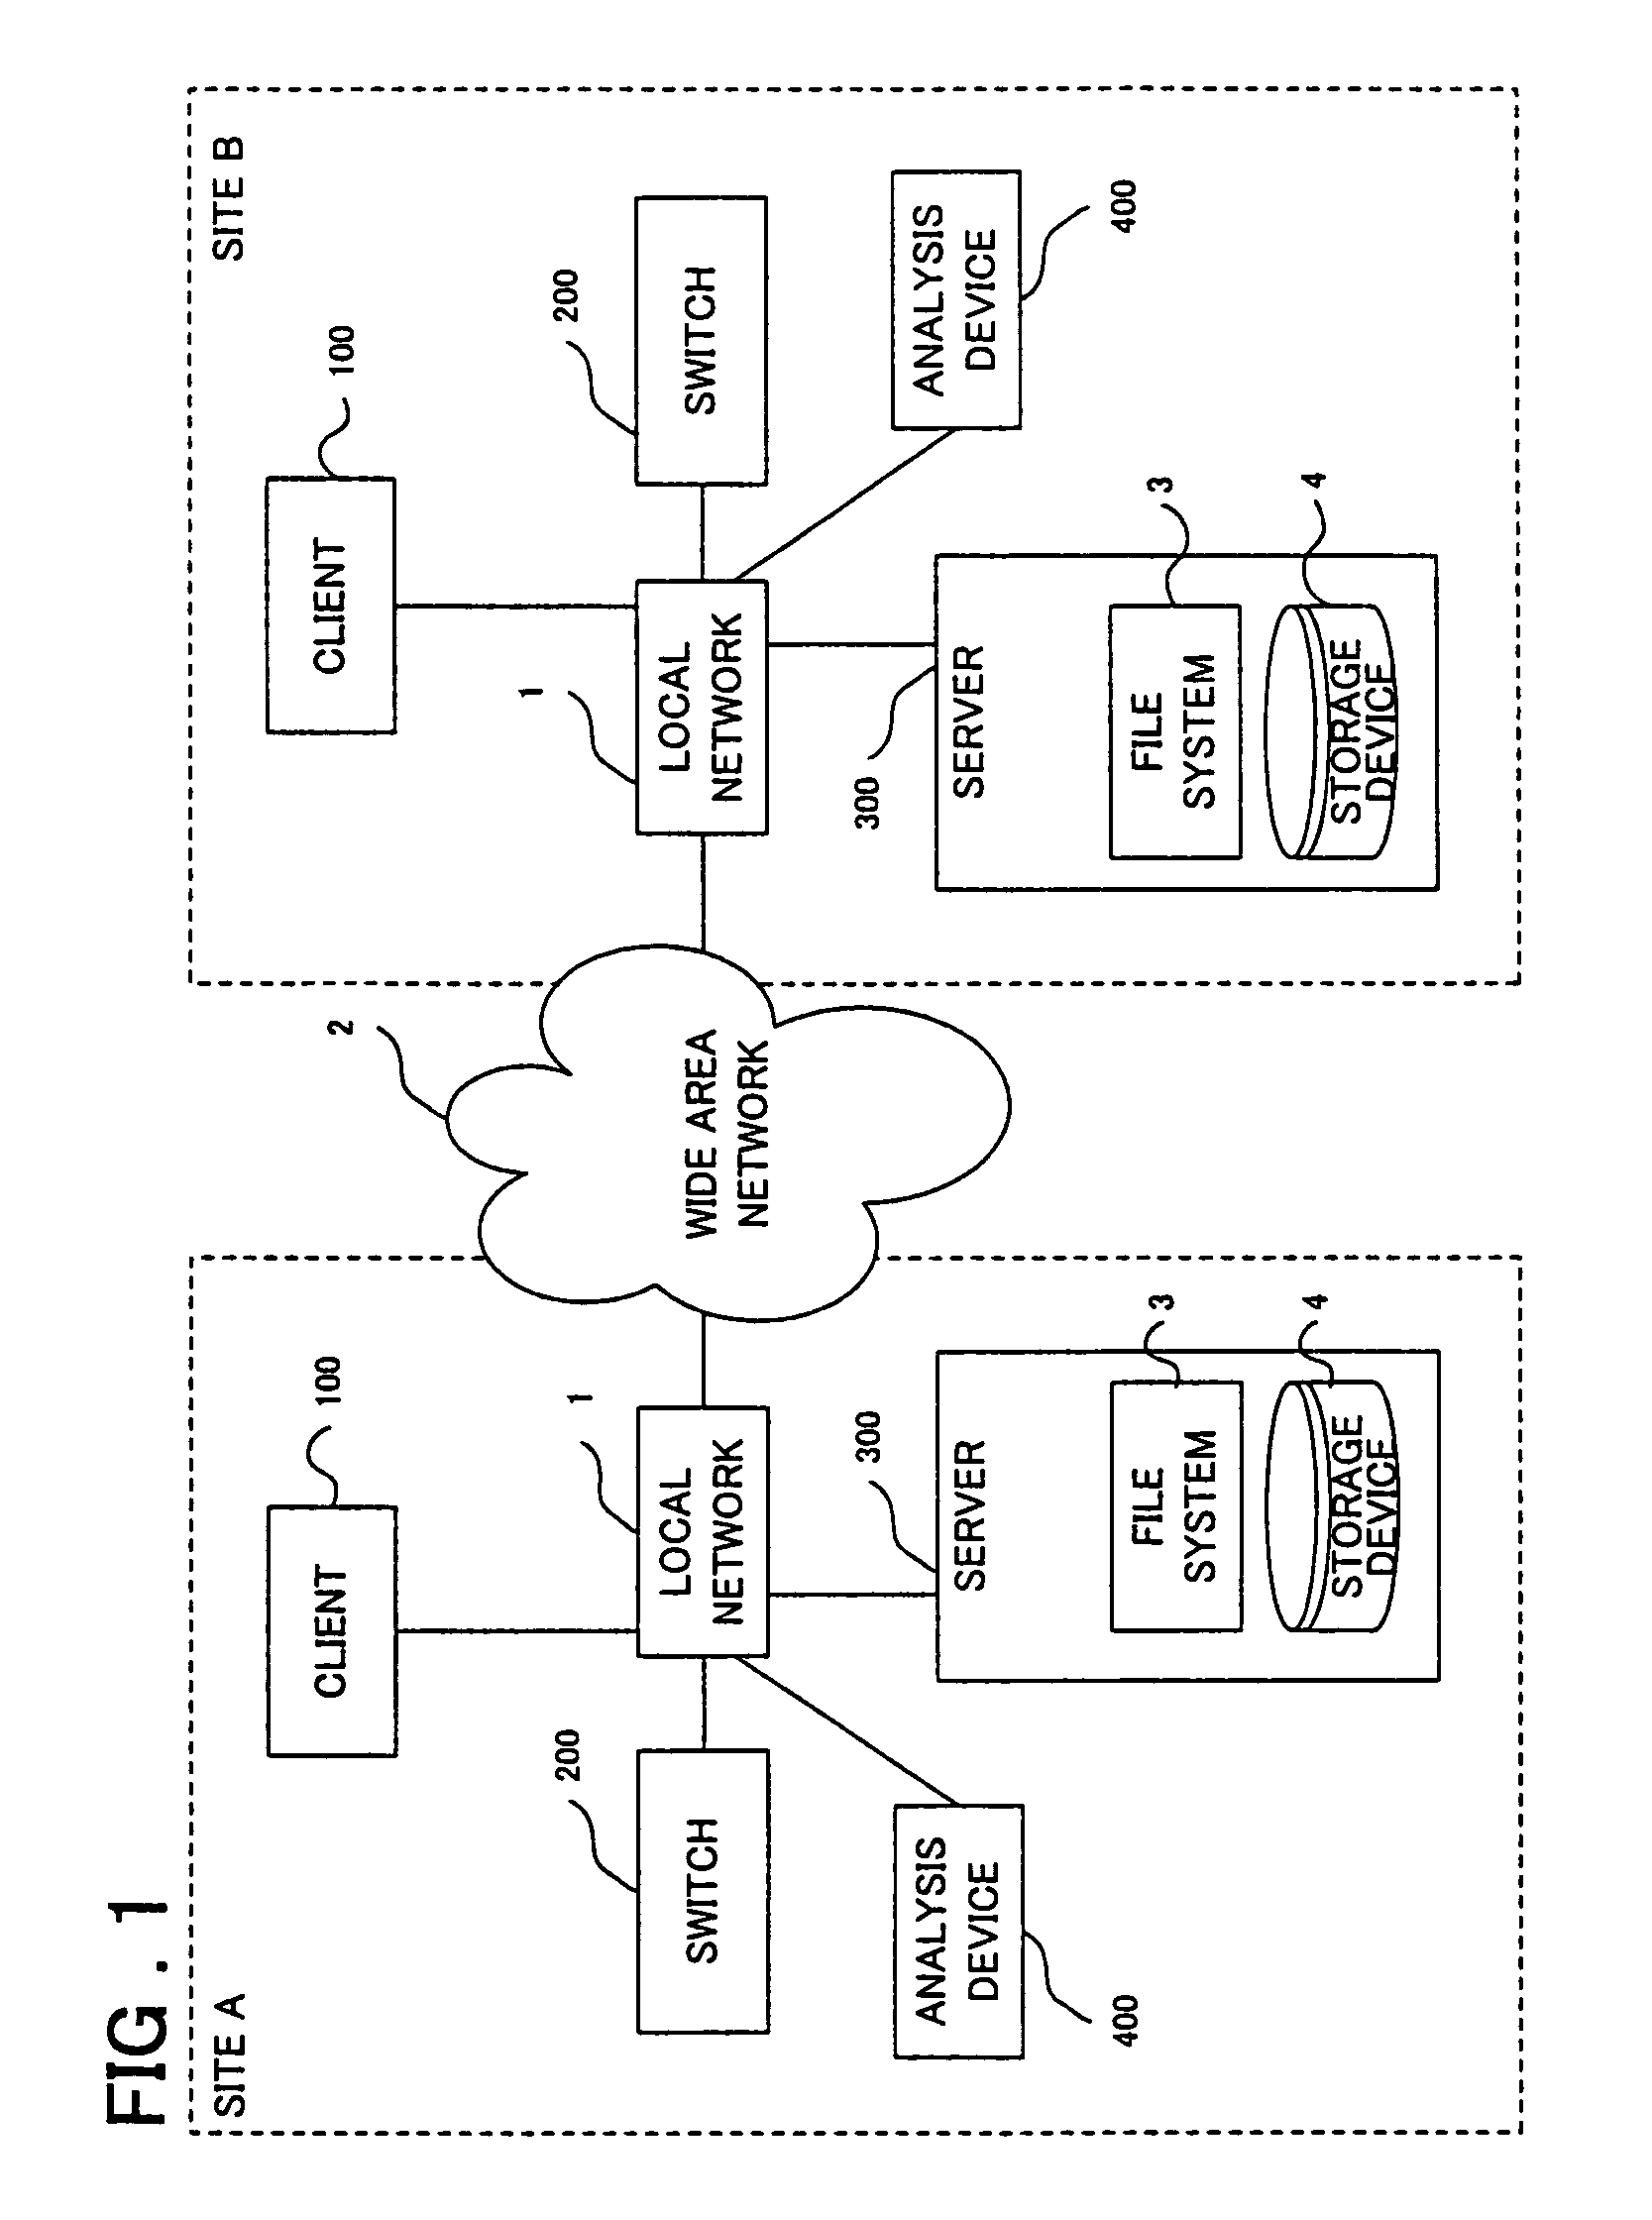 System and method for managing and arranging data based on an analysis of types of file access operations